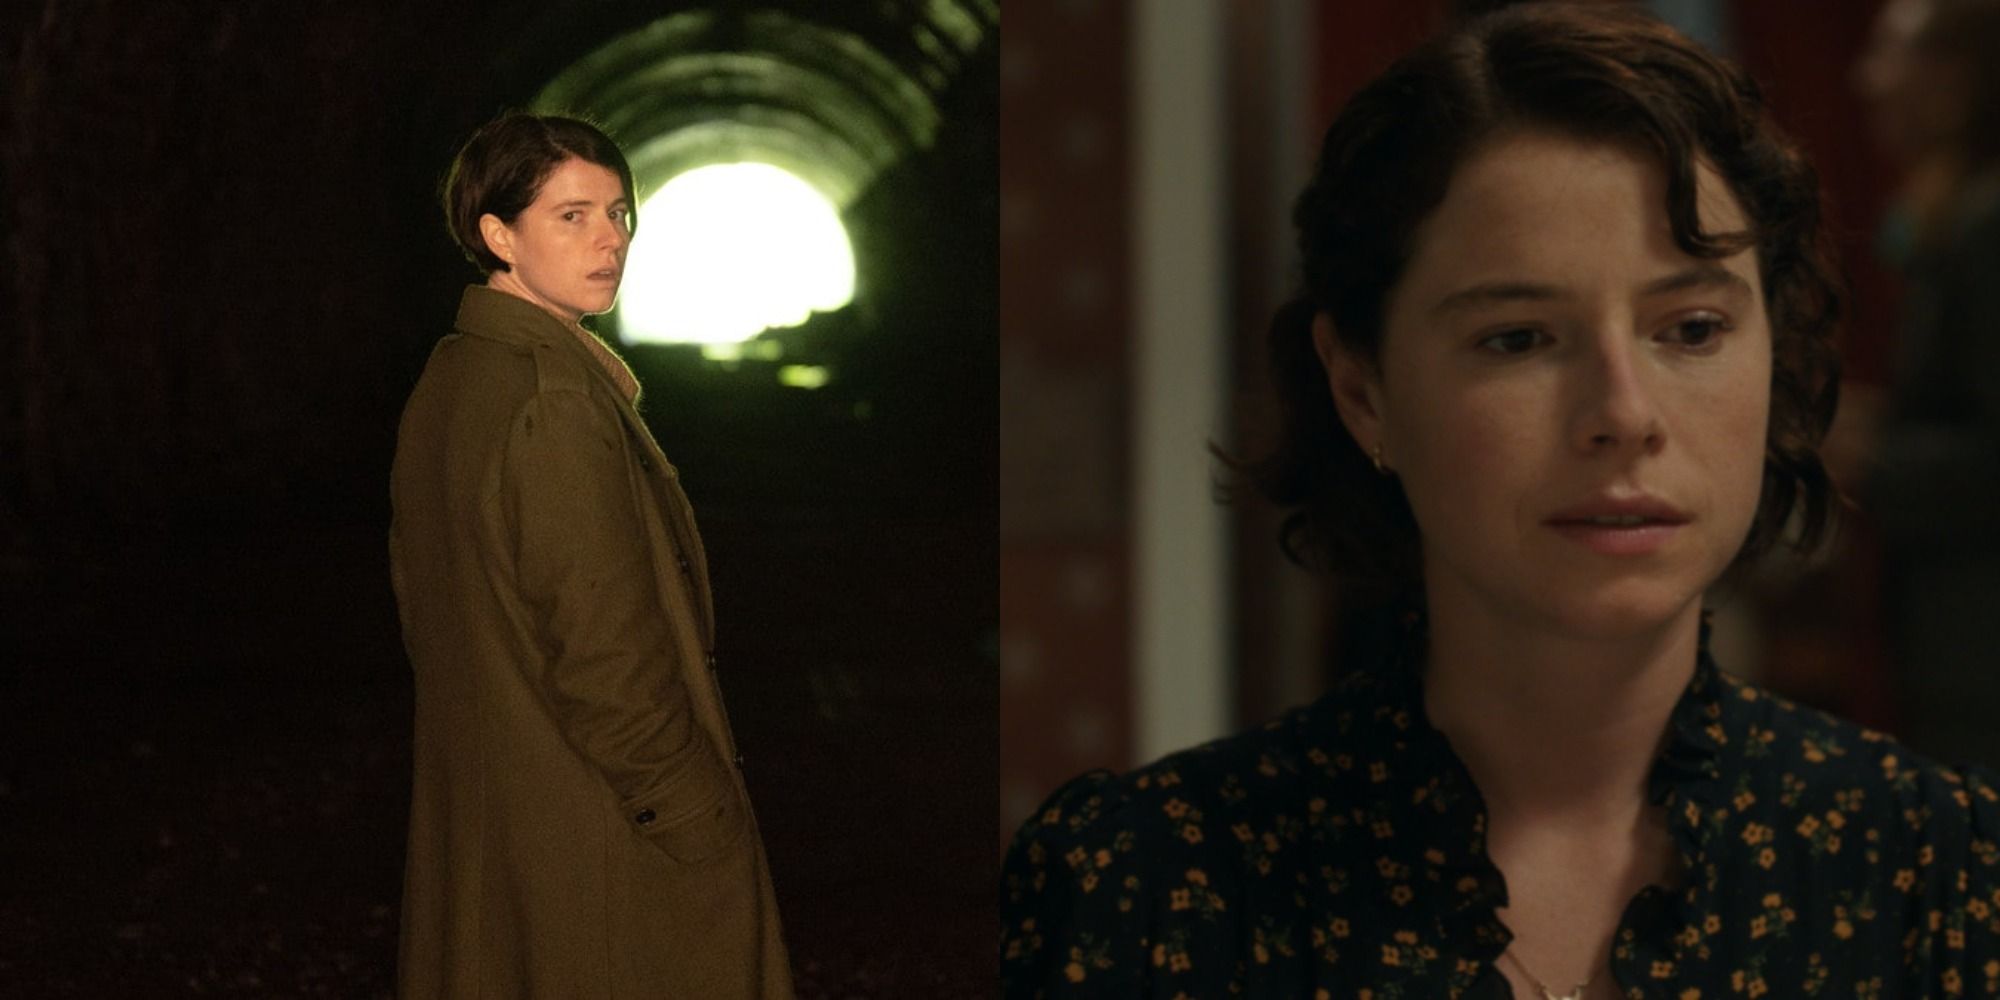 Split image of Jessie Buckley in a tunnel in Men and in closeup in The Lost Daughter